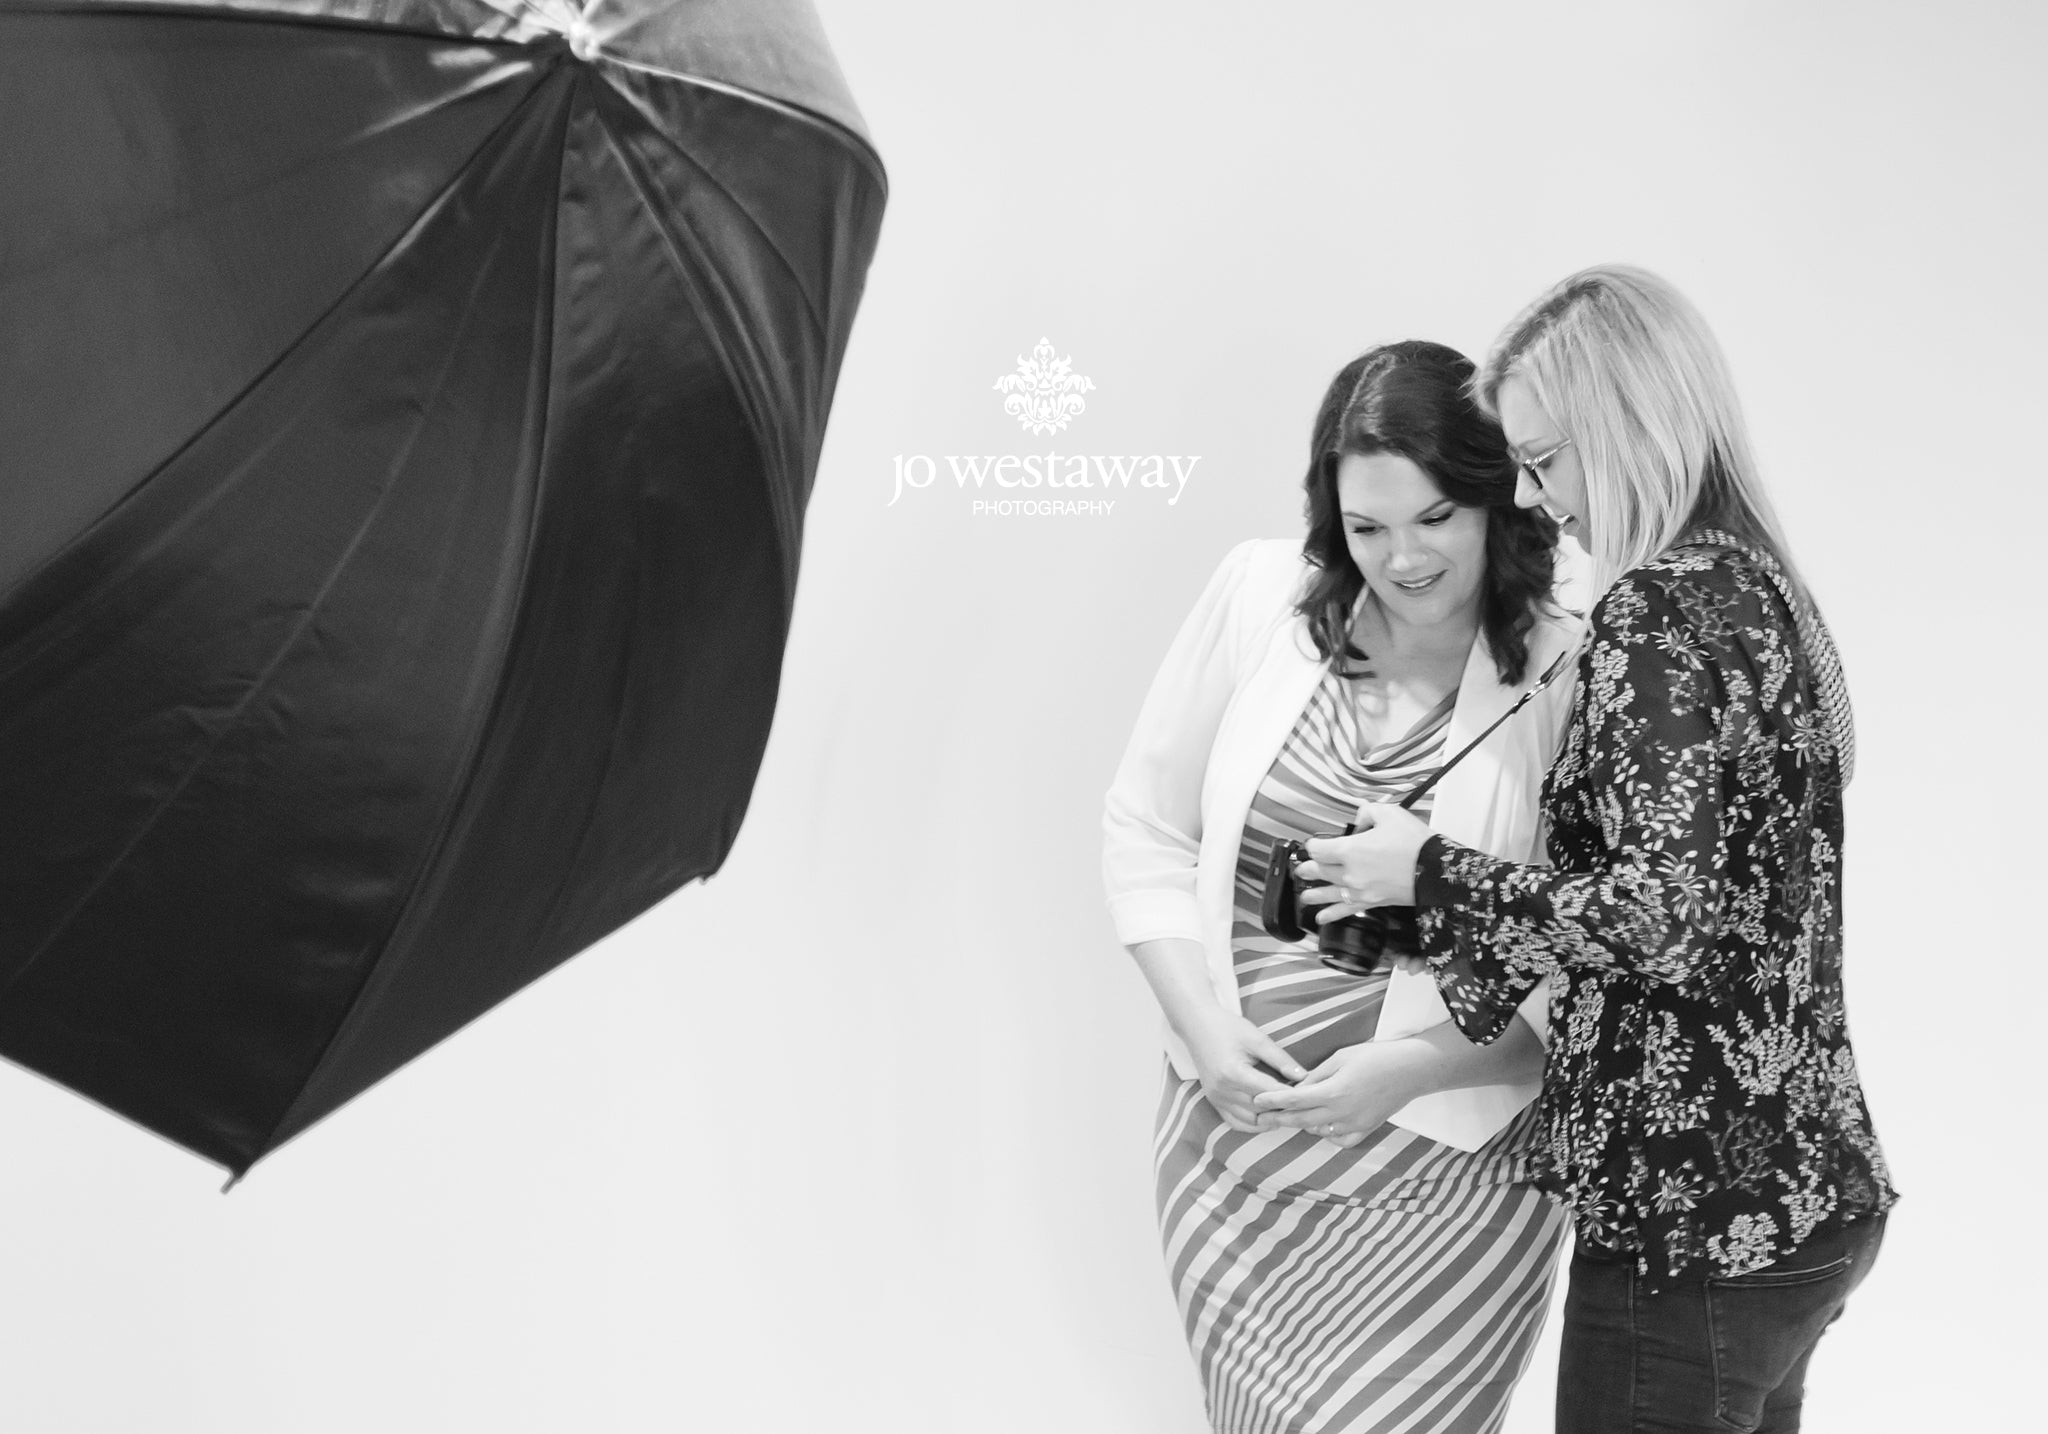 Show a branding client how amazing she looks - personal brand and headshot photography session